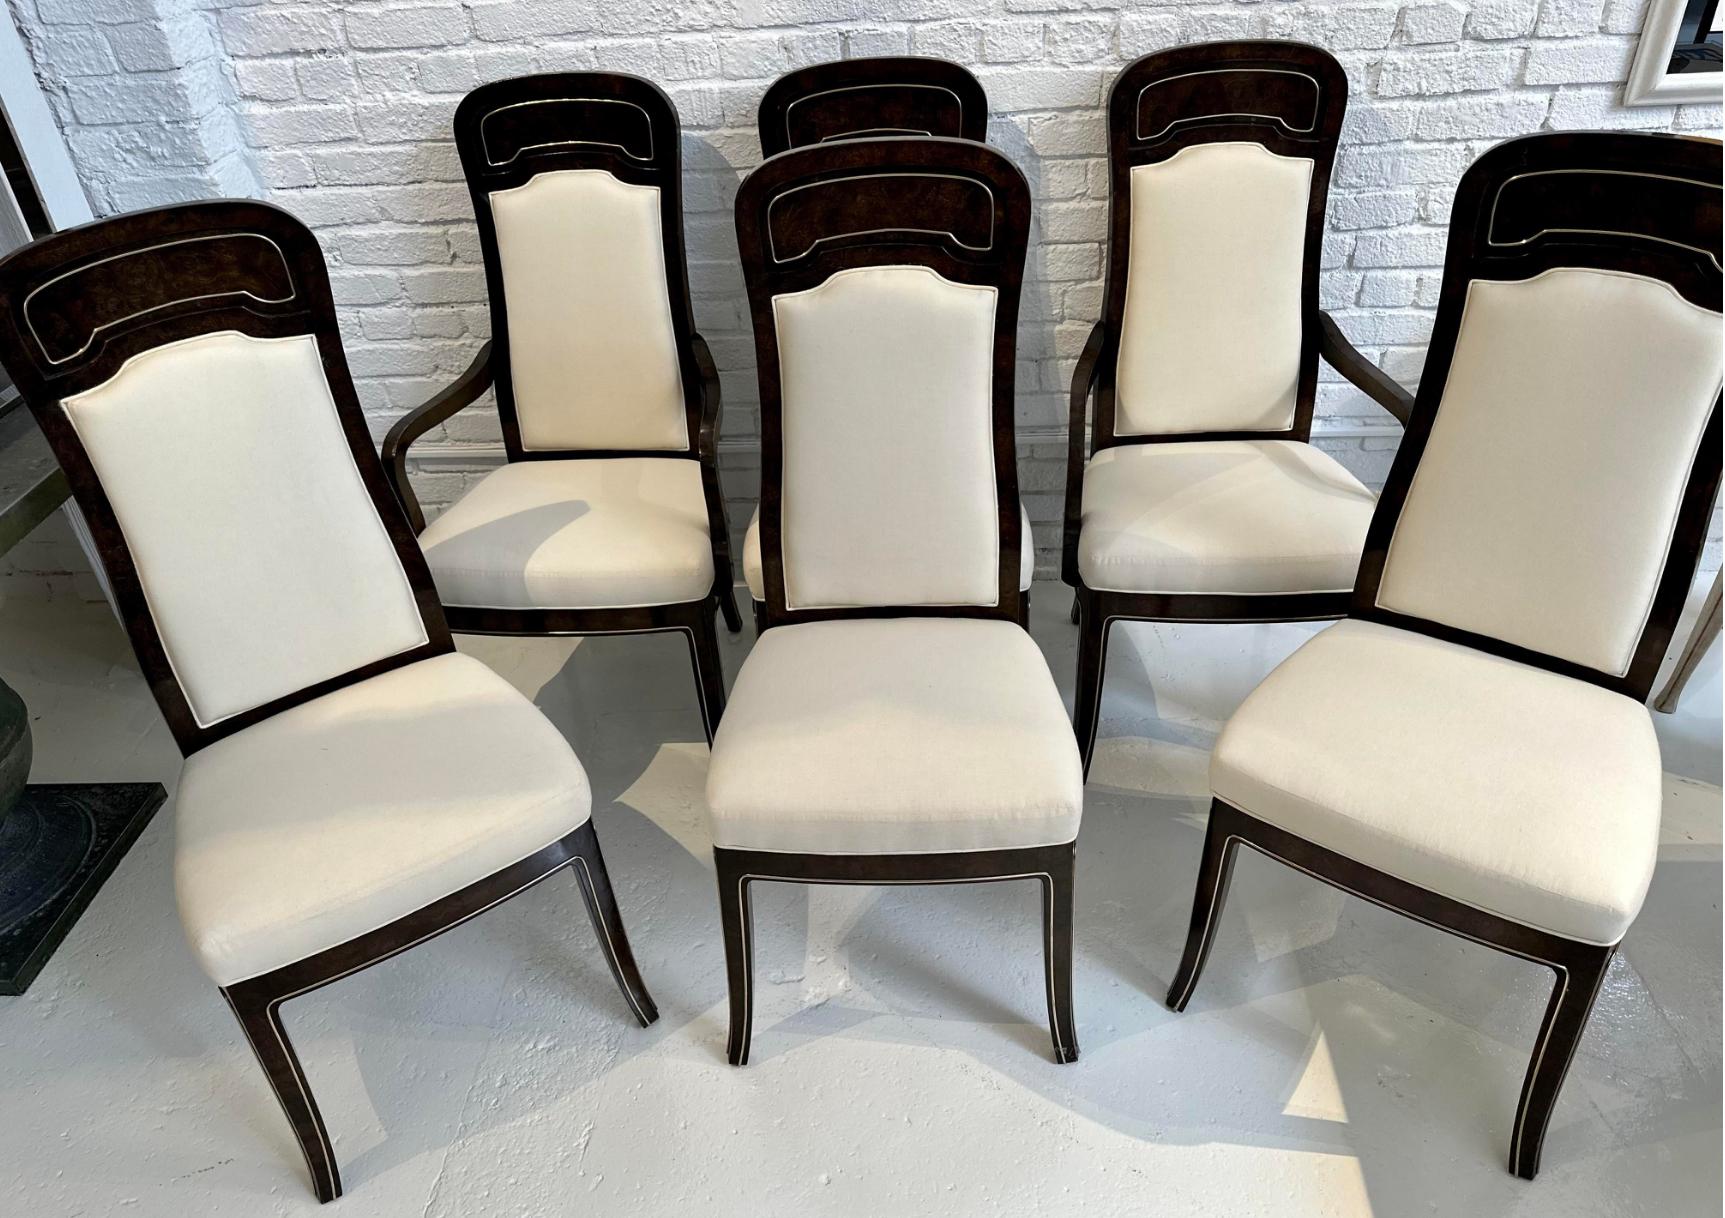 Set of 6 Mastercraft Carpathian Elm and Brass Inlaid Dining Chairs by William Doezema. The set includes two arm chairs and four side chairs.